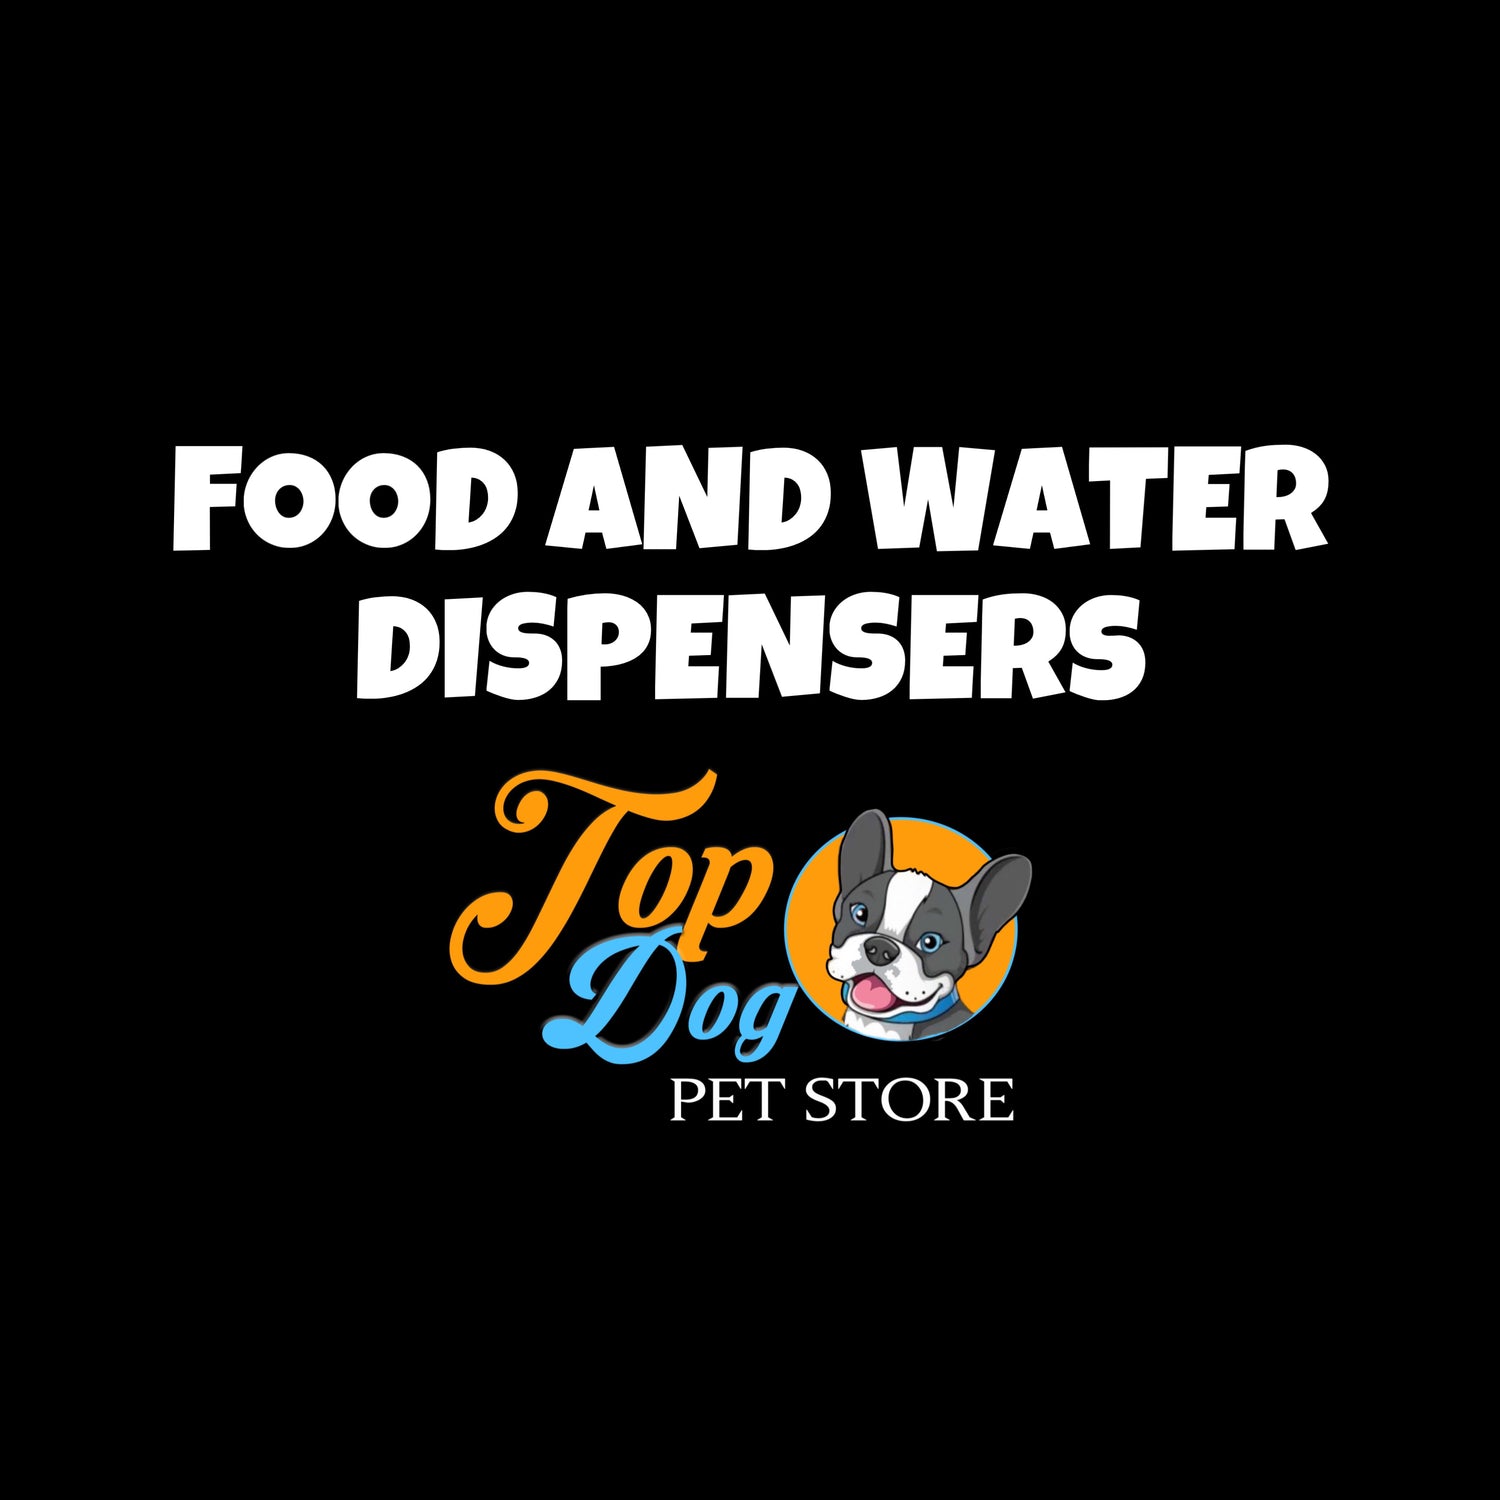 FOOD AND WATER DISPENSERS